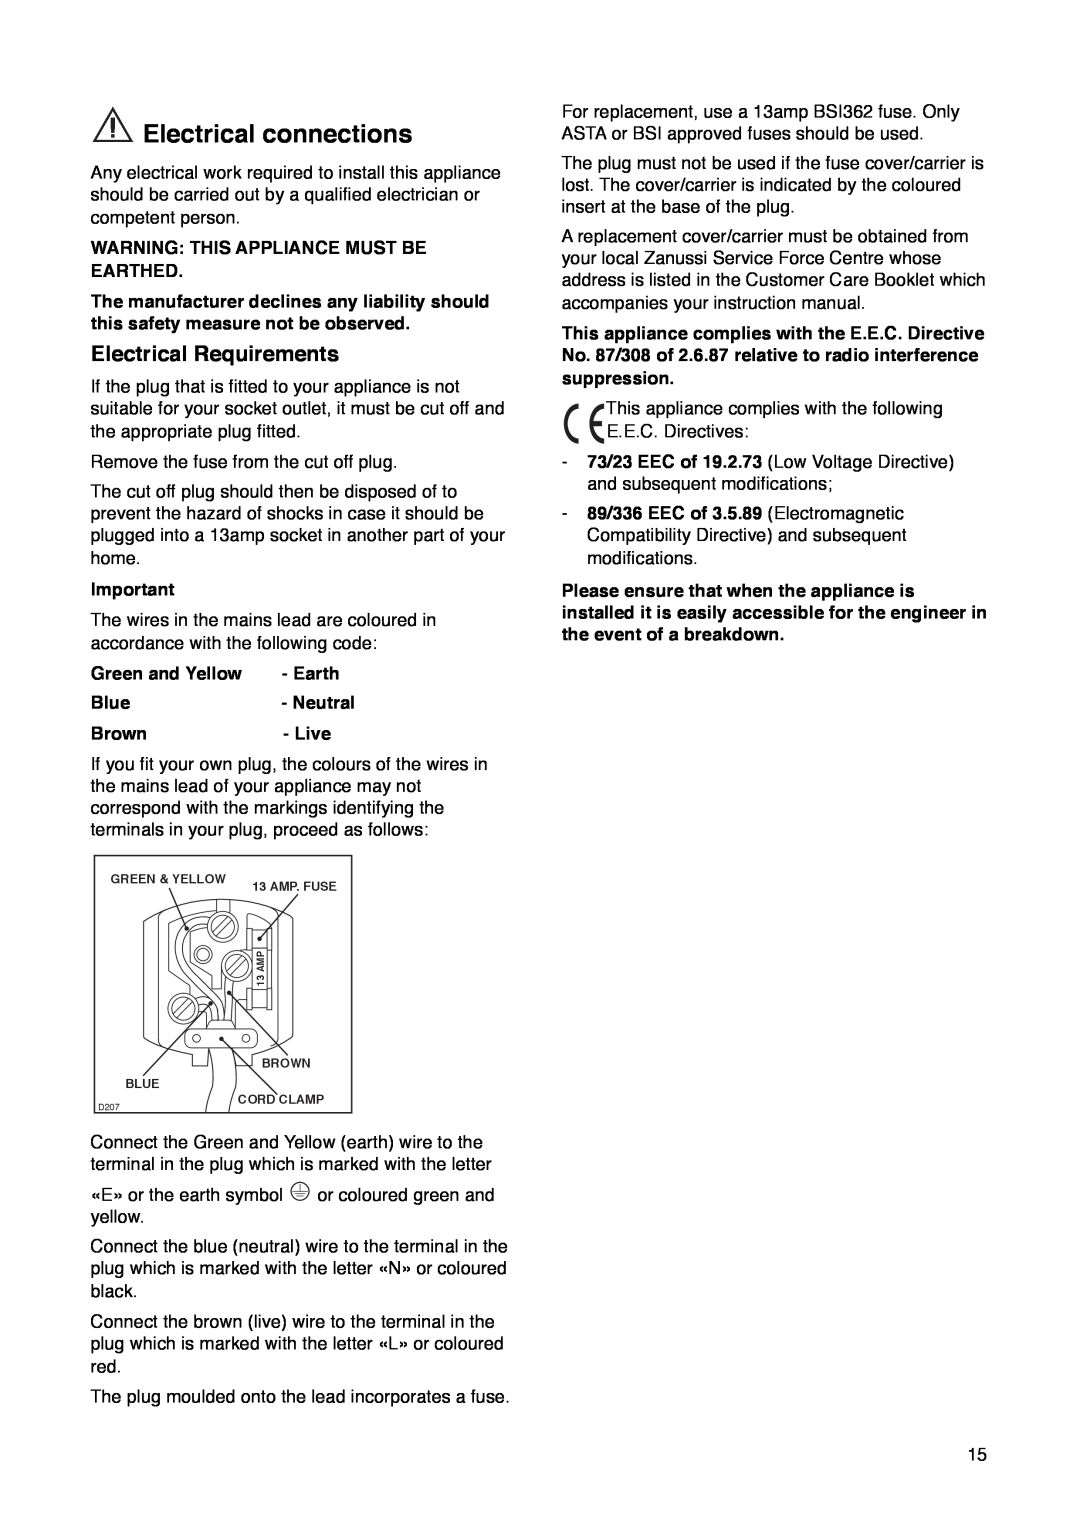 Zanussi ZU 7115 manual Electrical connections, Electrical Requirements 